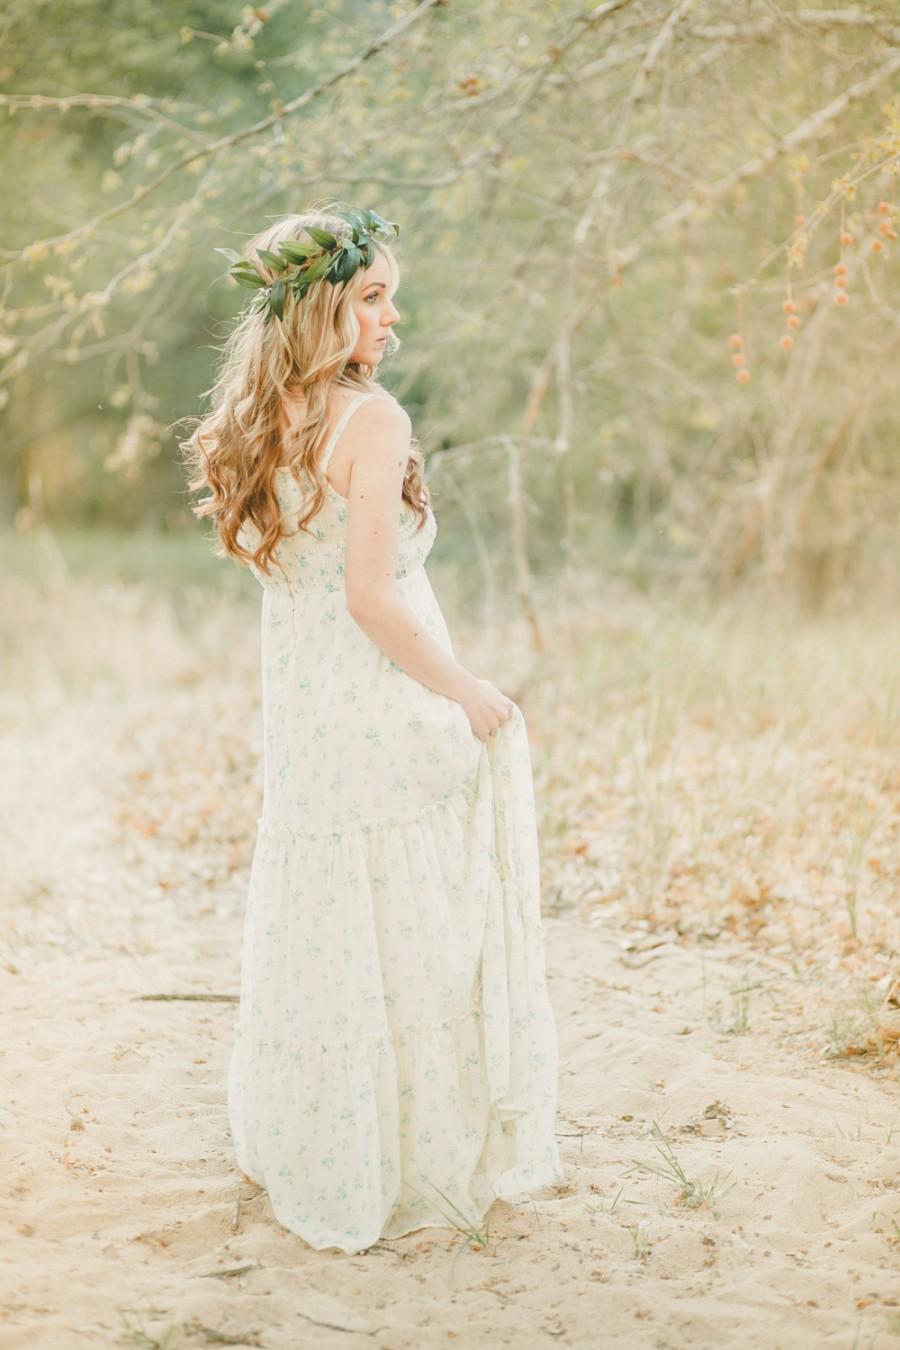 Wedding - The Eve Flower Crown created with lush greenery